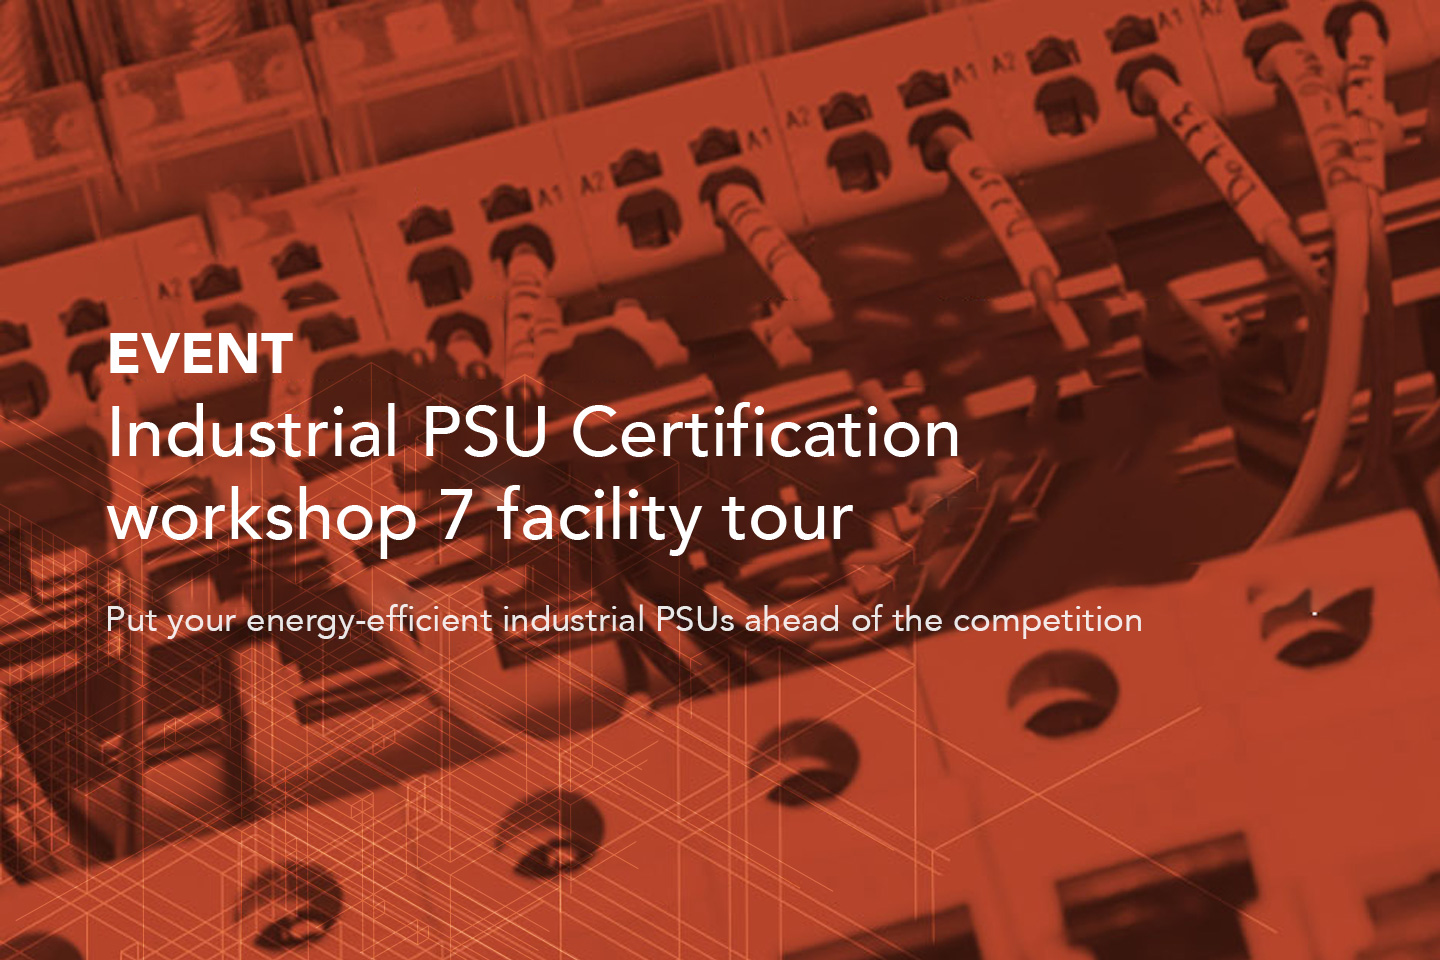 Get an inside look at our Industrial PSU Certification Workshop and Facility Tour